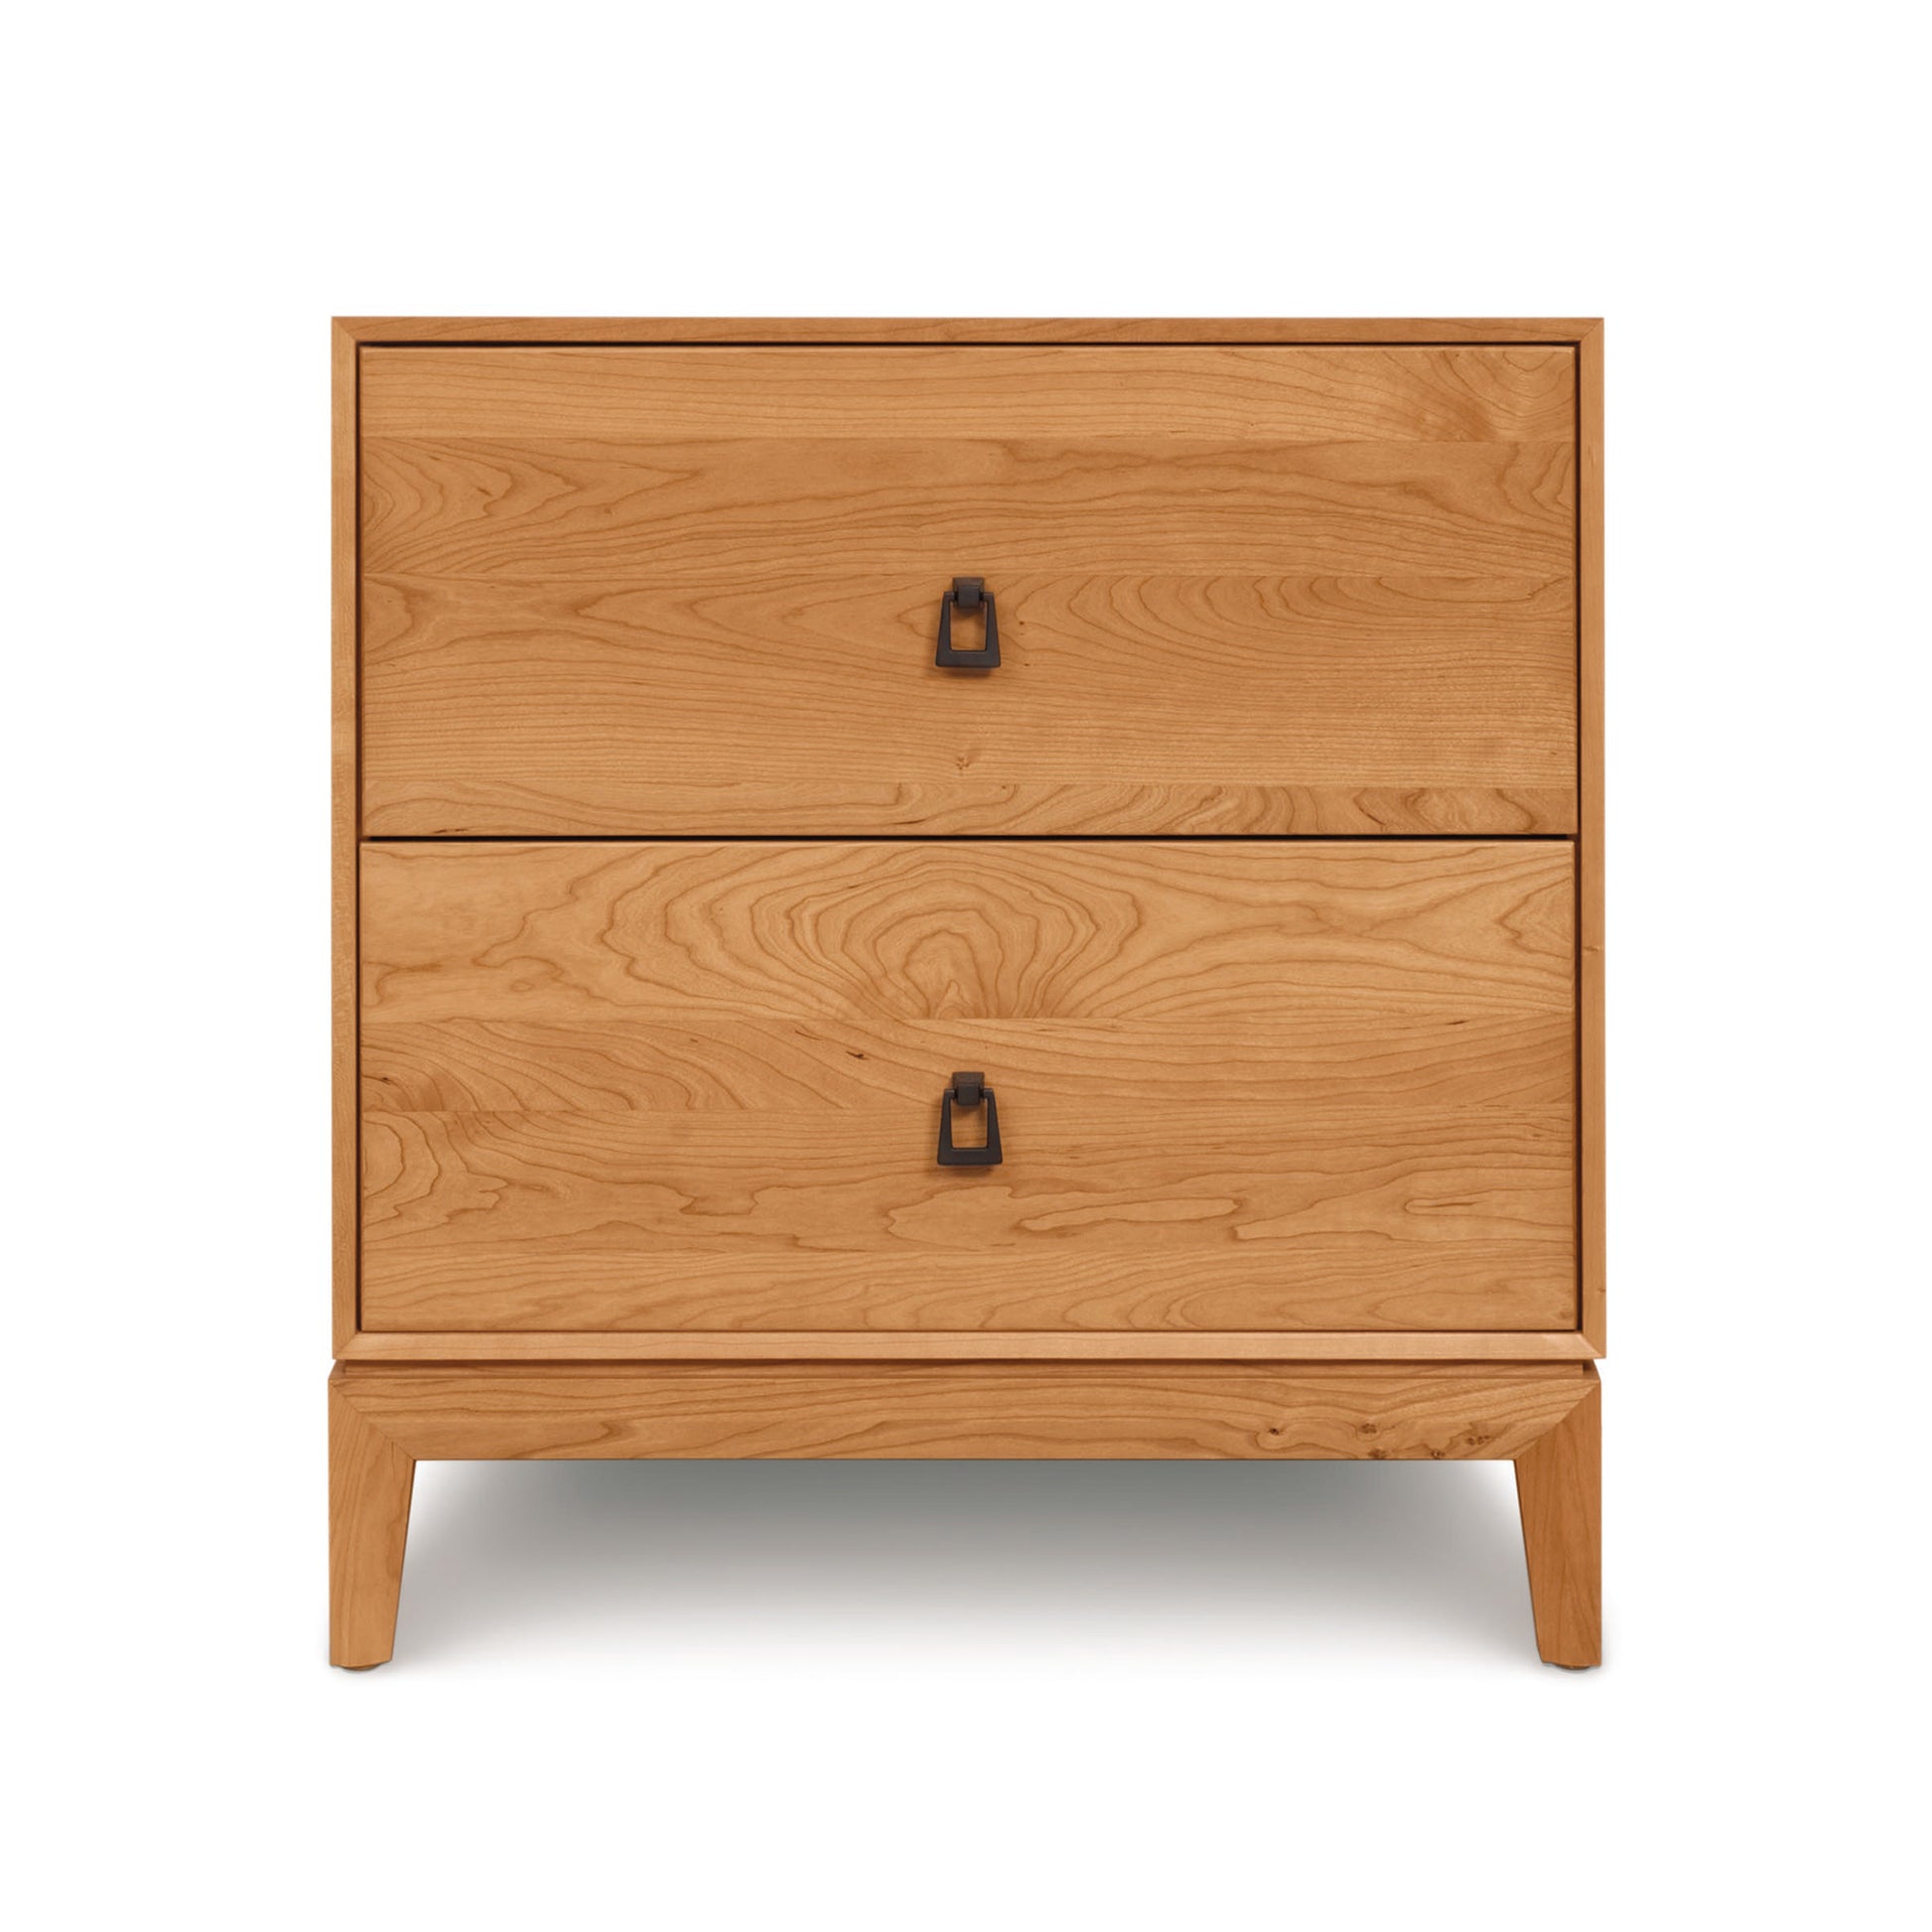 A Copeland Furniture Mansfield 2-Drawer Nightstand with simple handles situated on a plain white background.